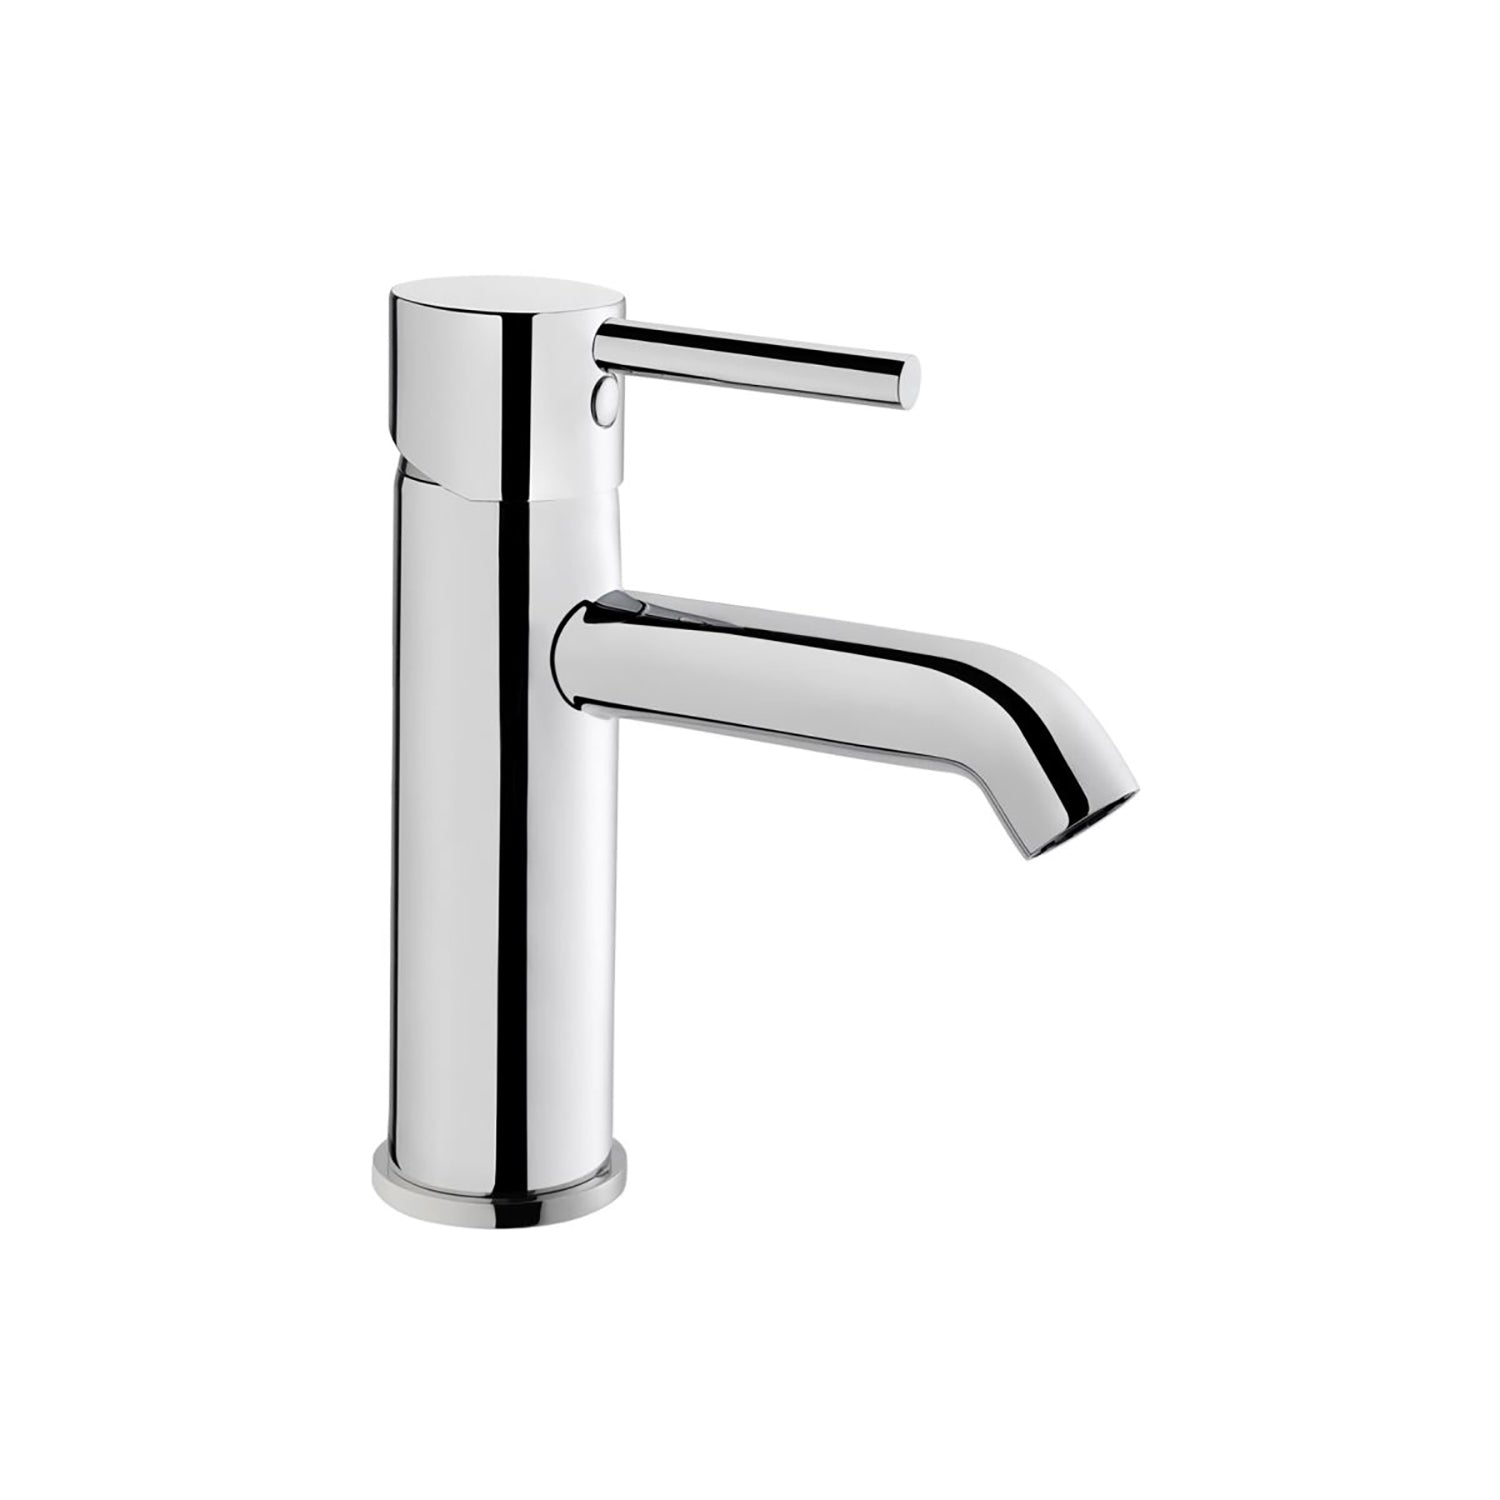 One hole deck mounted Modale Comfort Lever Basin Tap with an extended lever and chrome finish on a white background